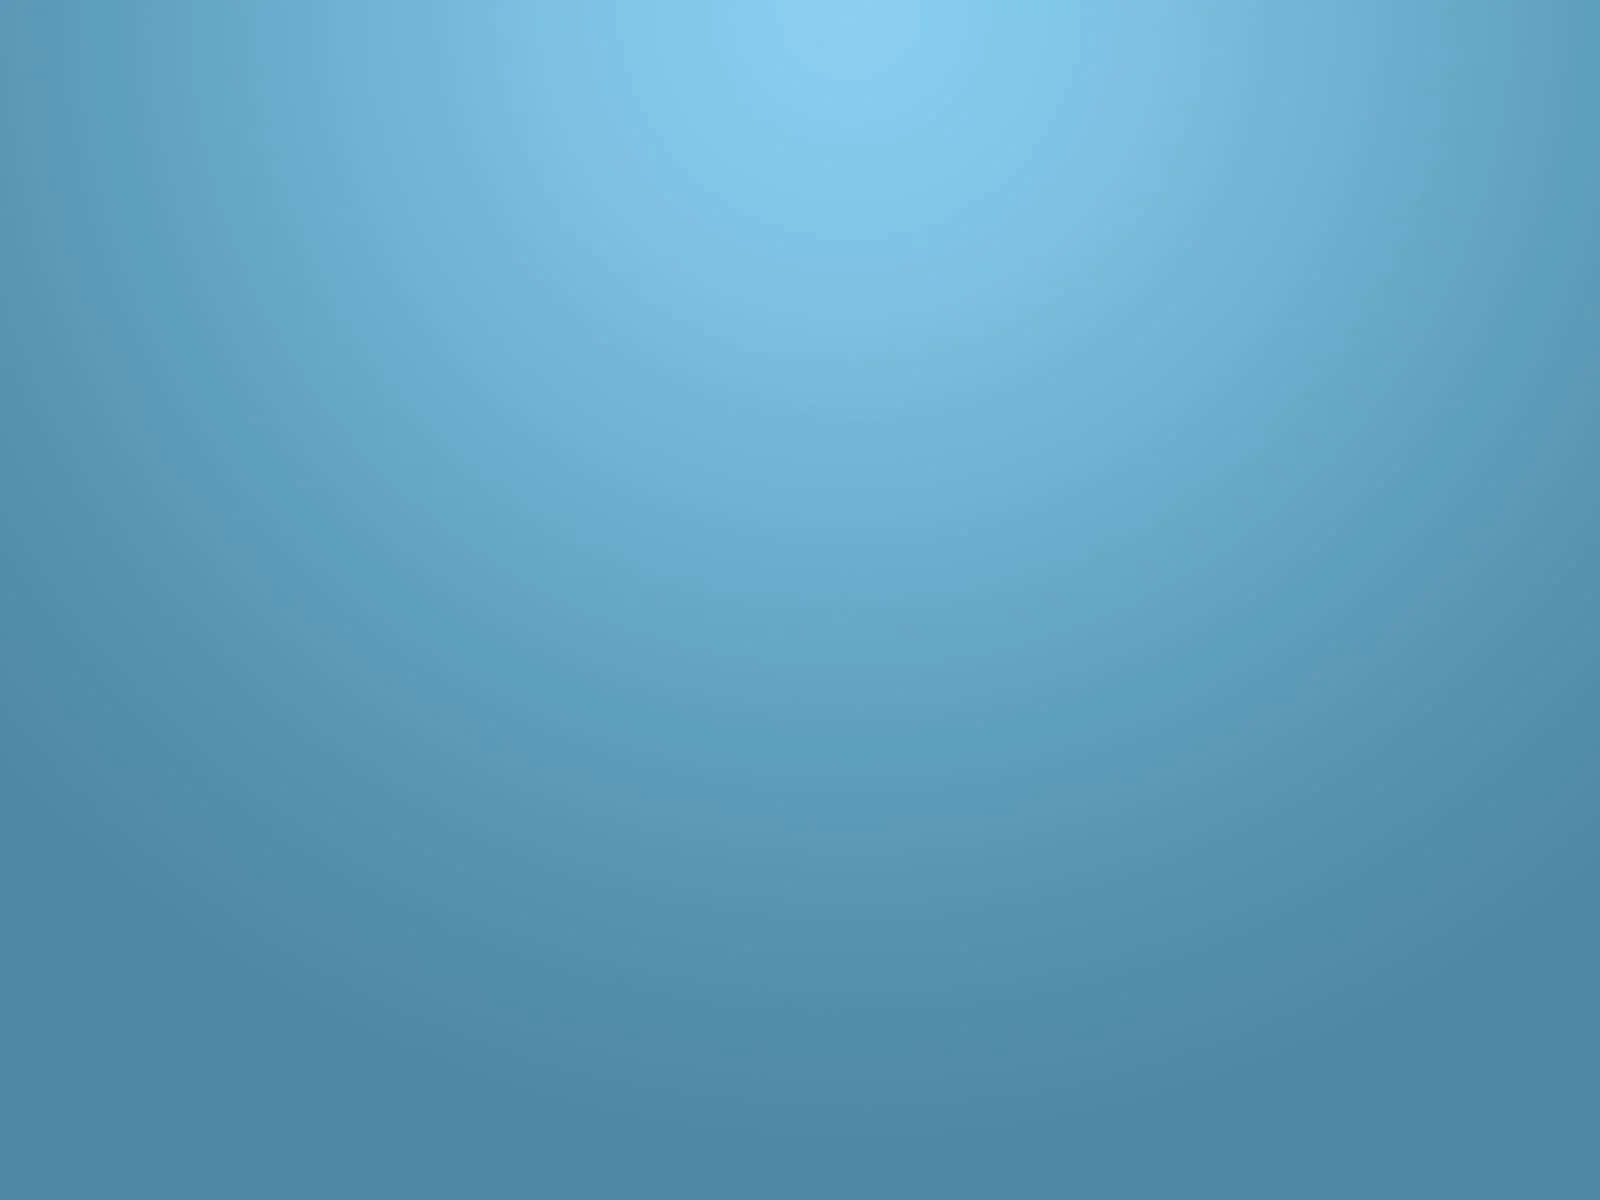 Bright and Airy Solid Light Blue Background